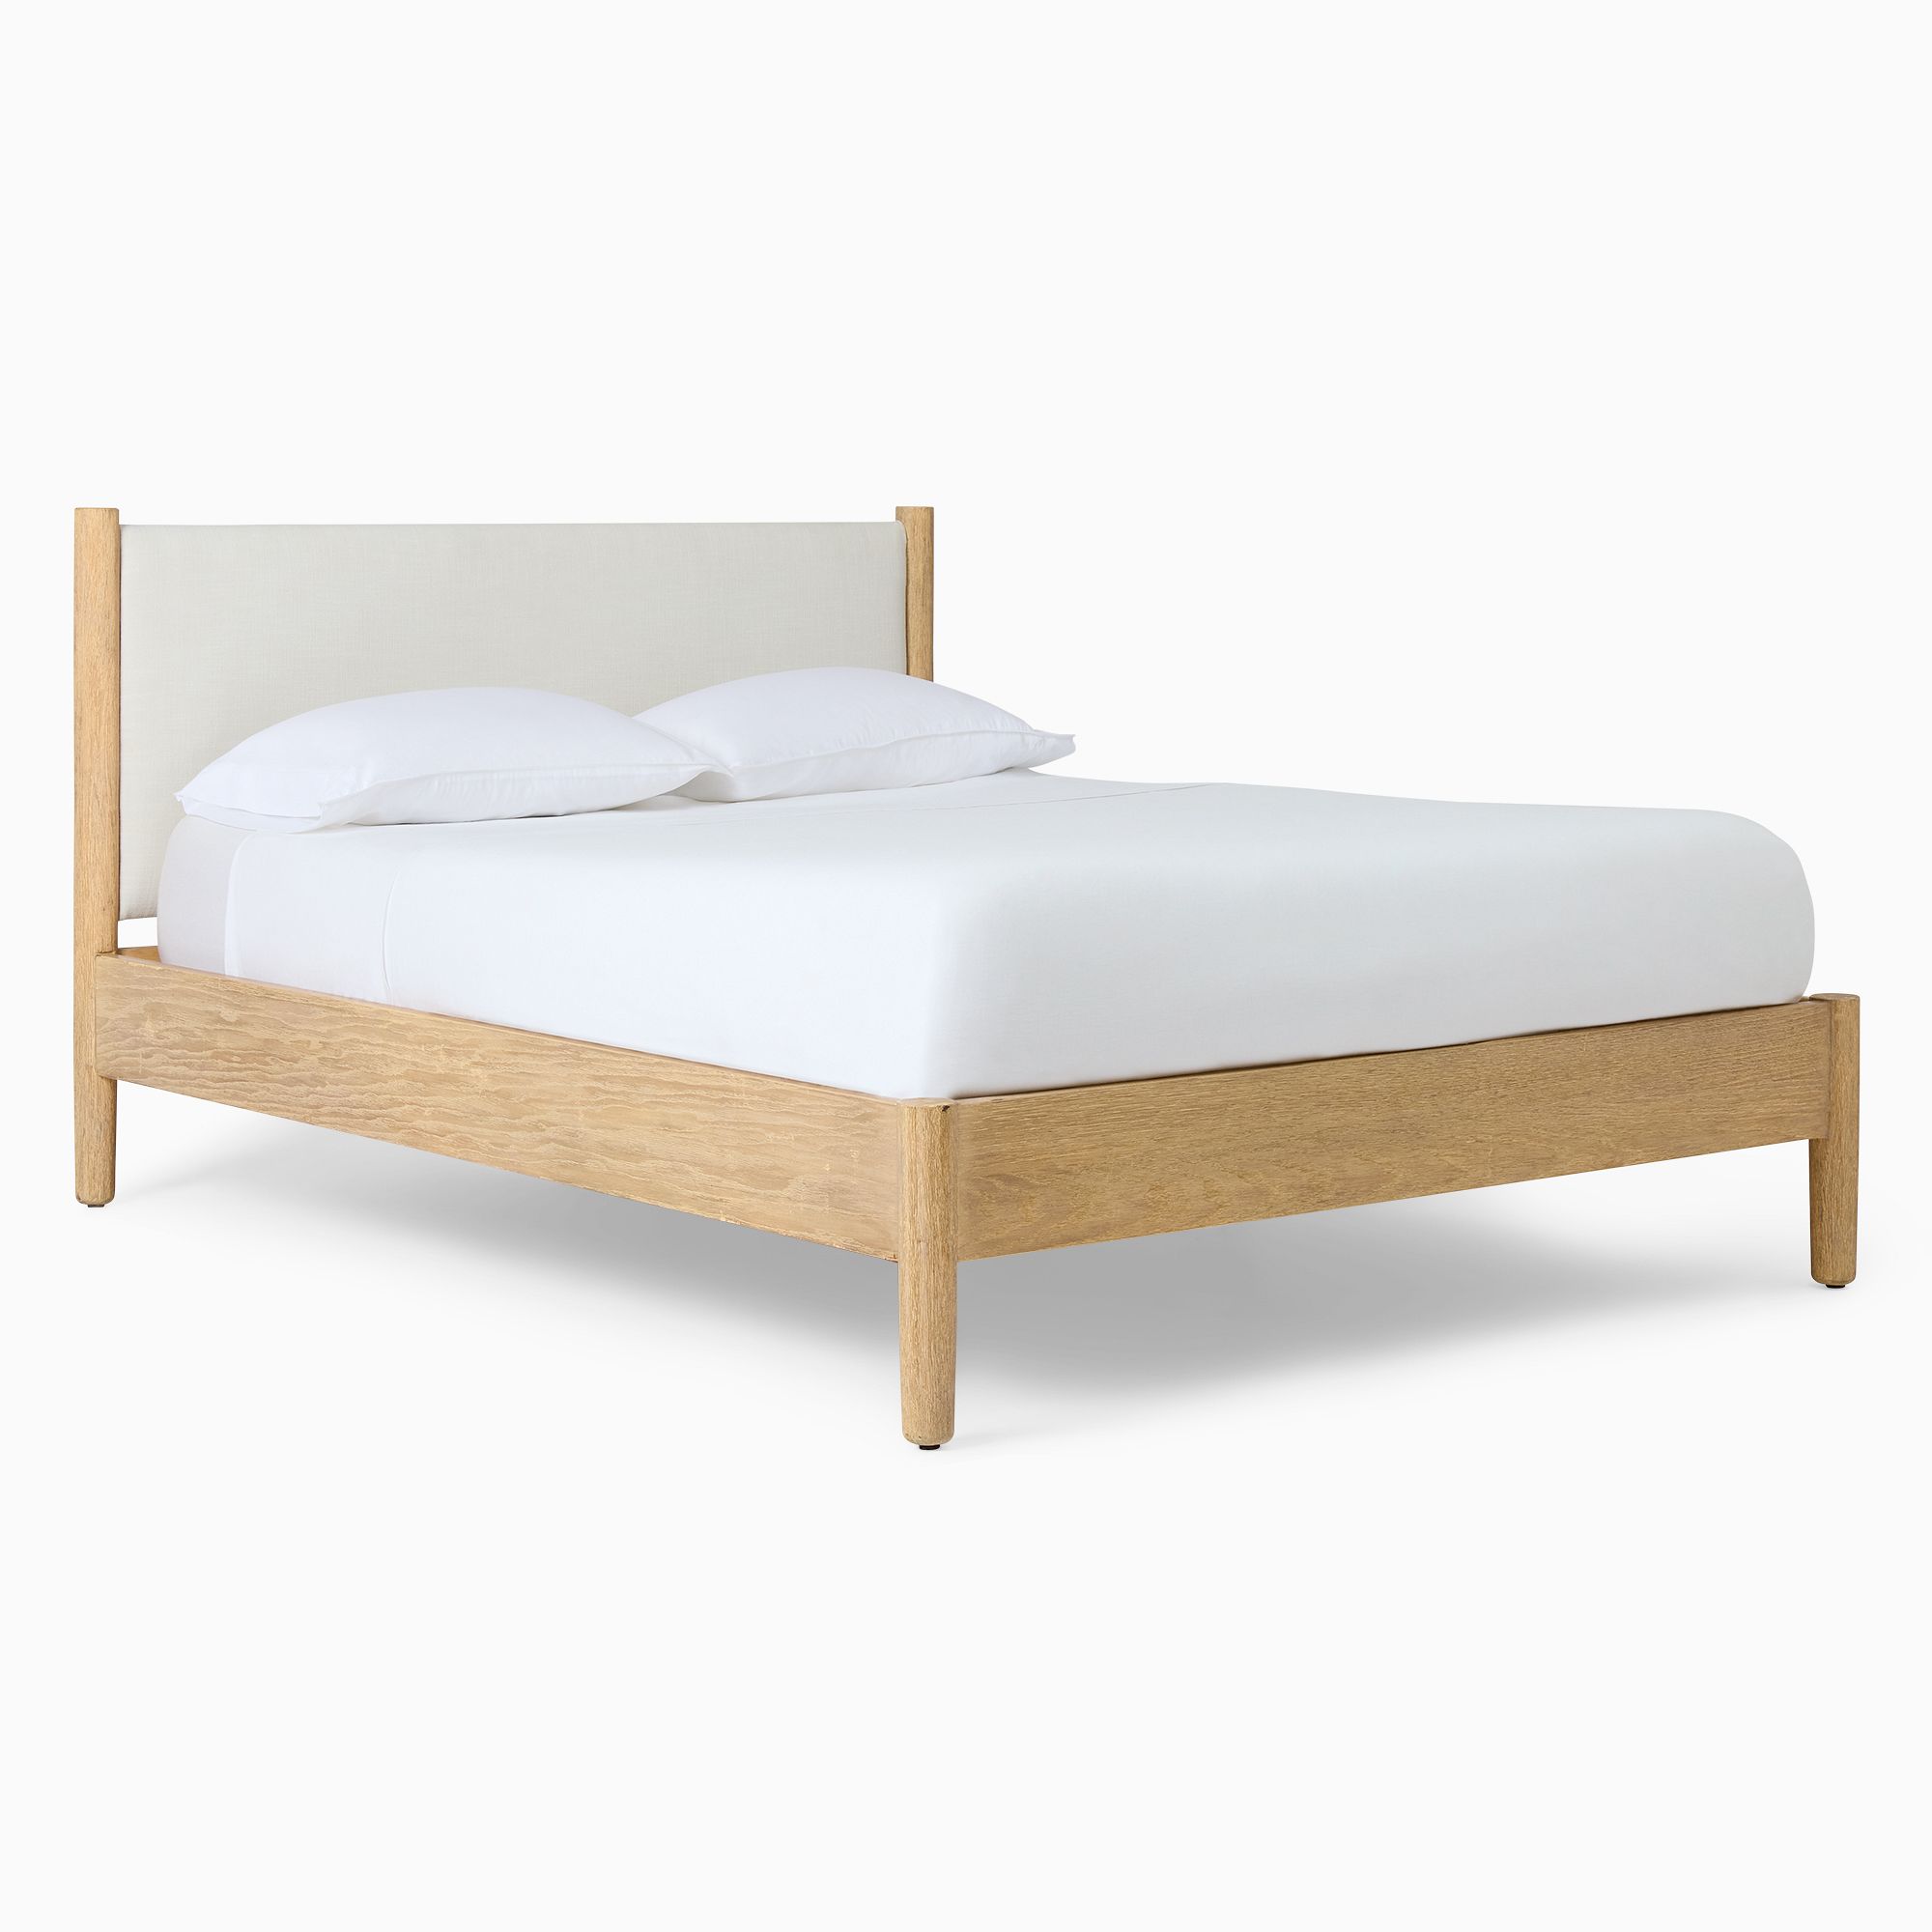 Hargrove Bed | West Elm